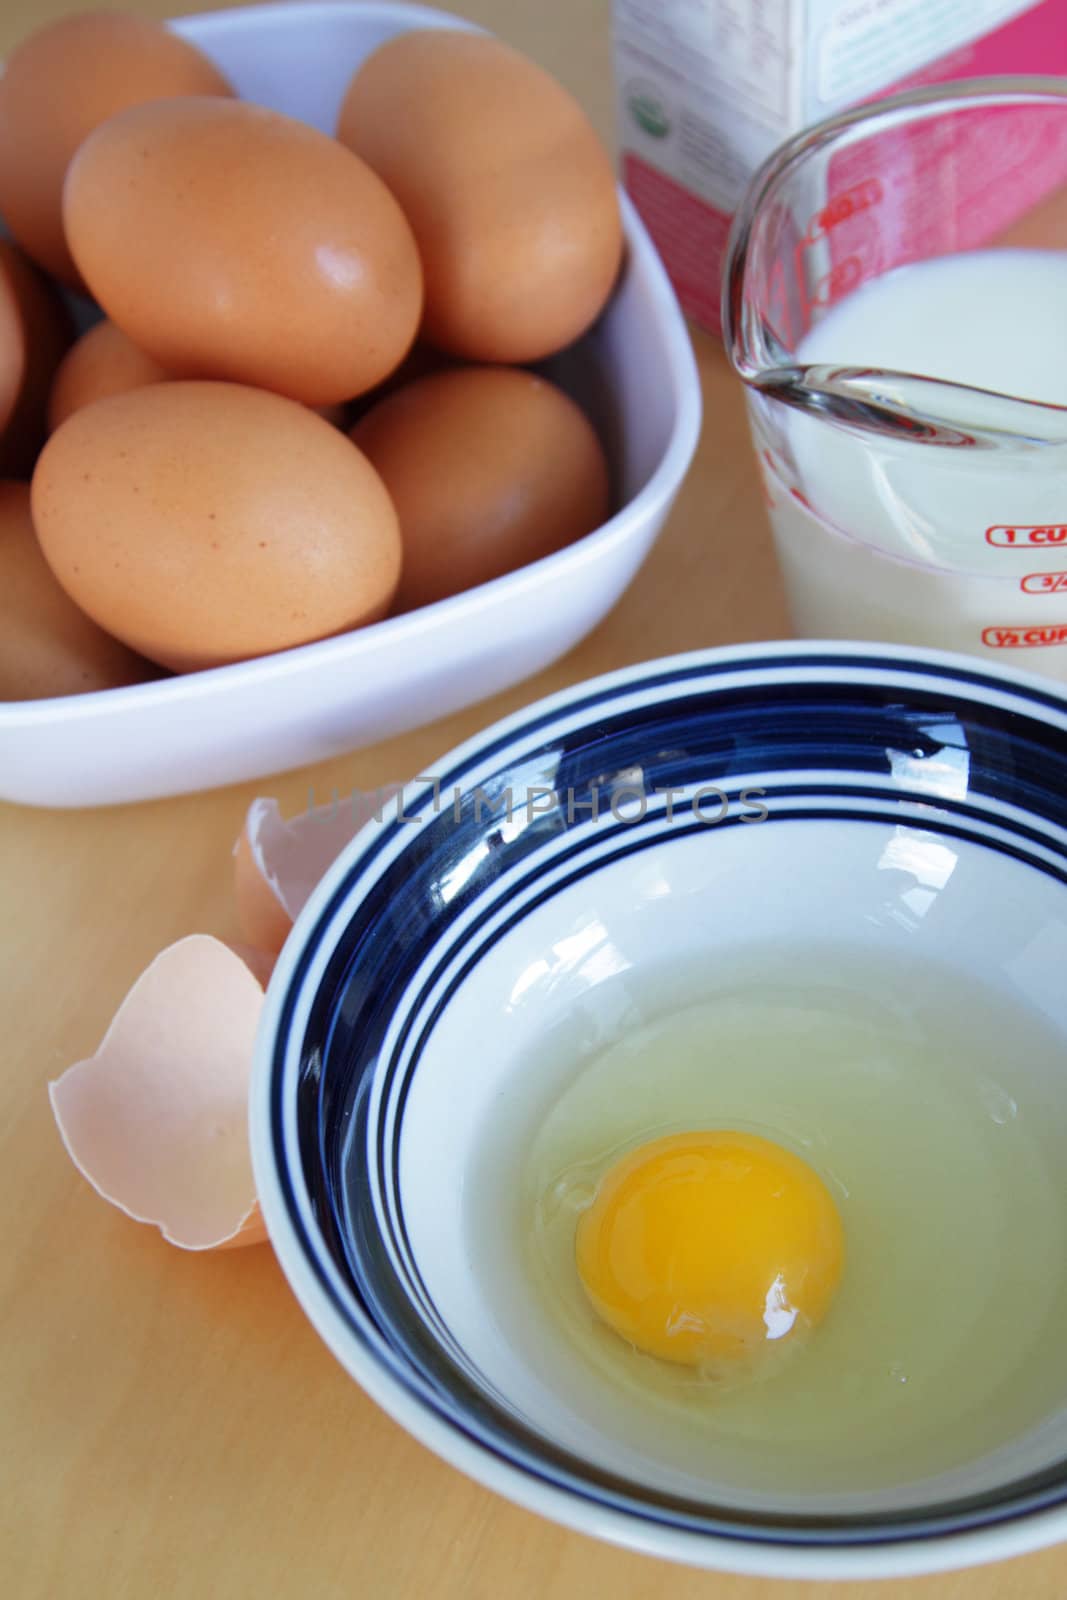 Cooking set with eggs and milk on the table